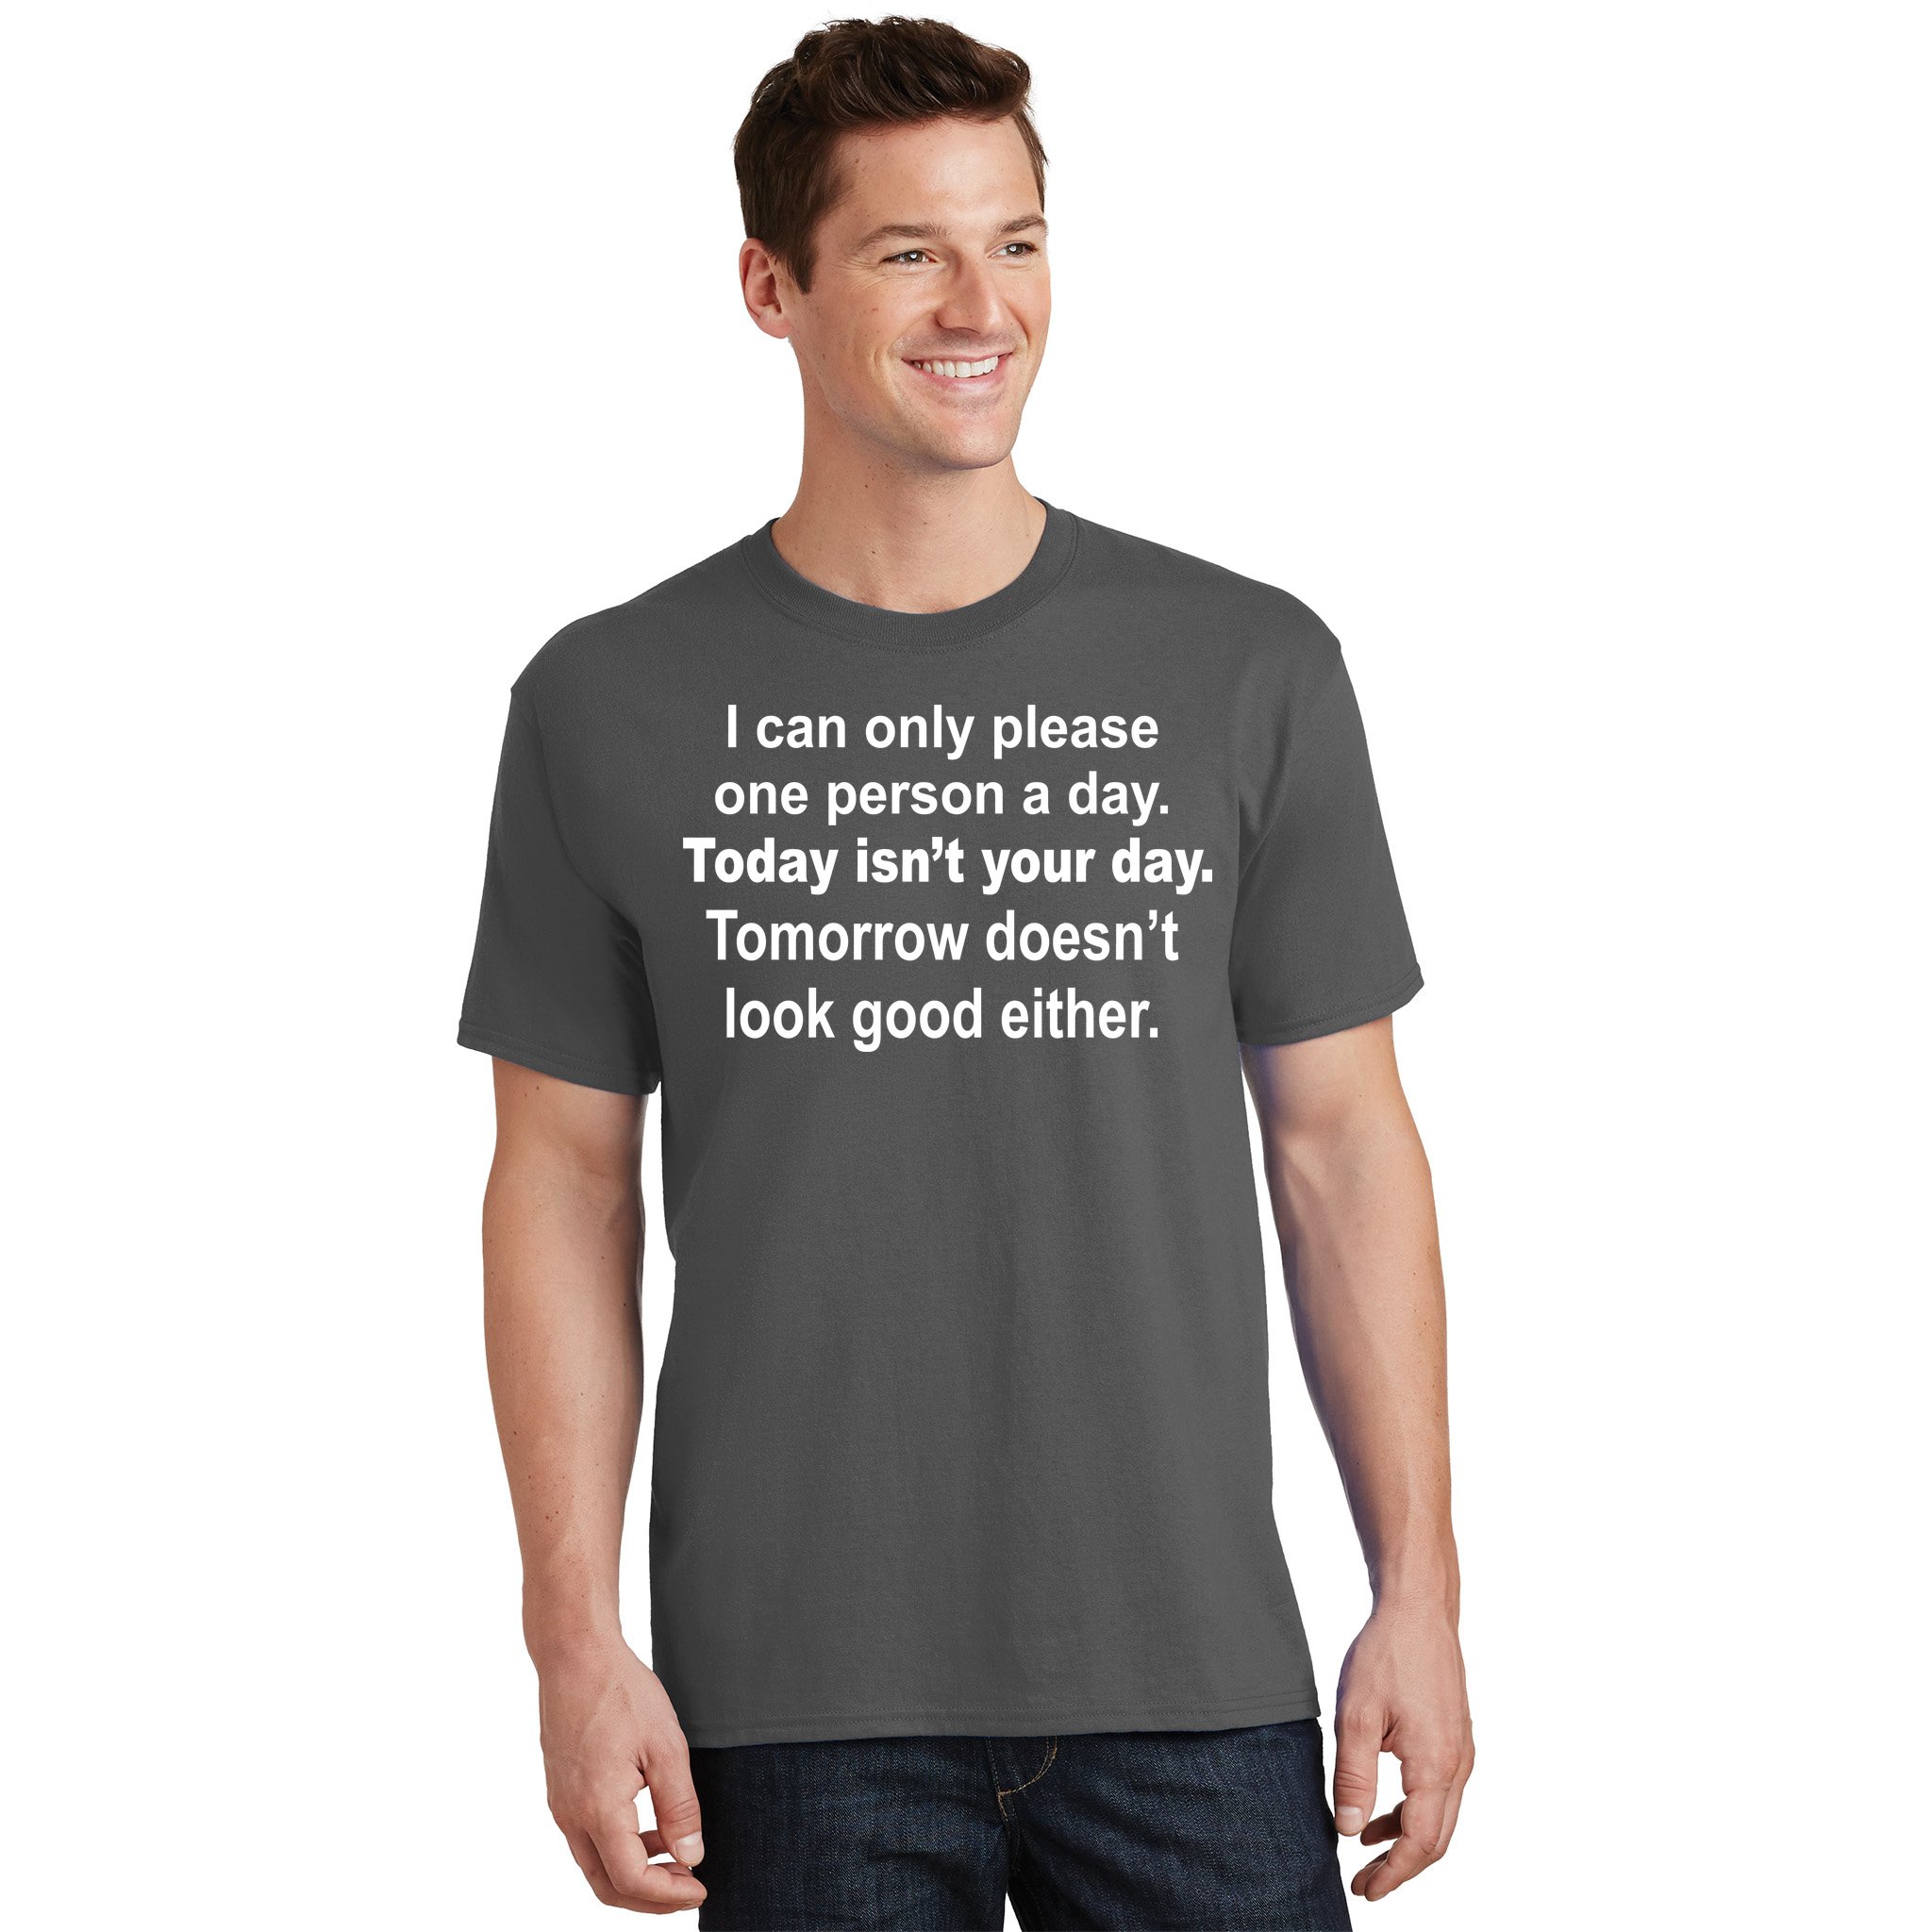 big and tall t-shirt today isn't your day funny tee shirt tall shirts for men 